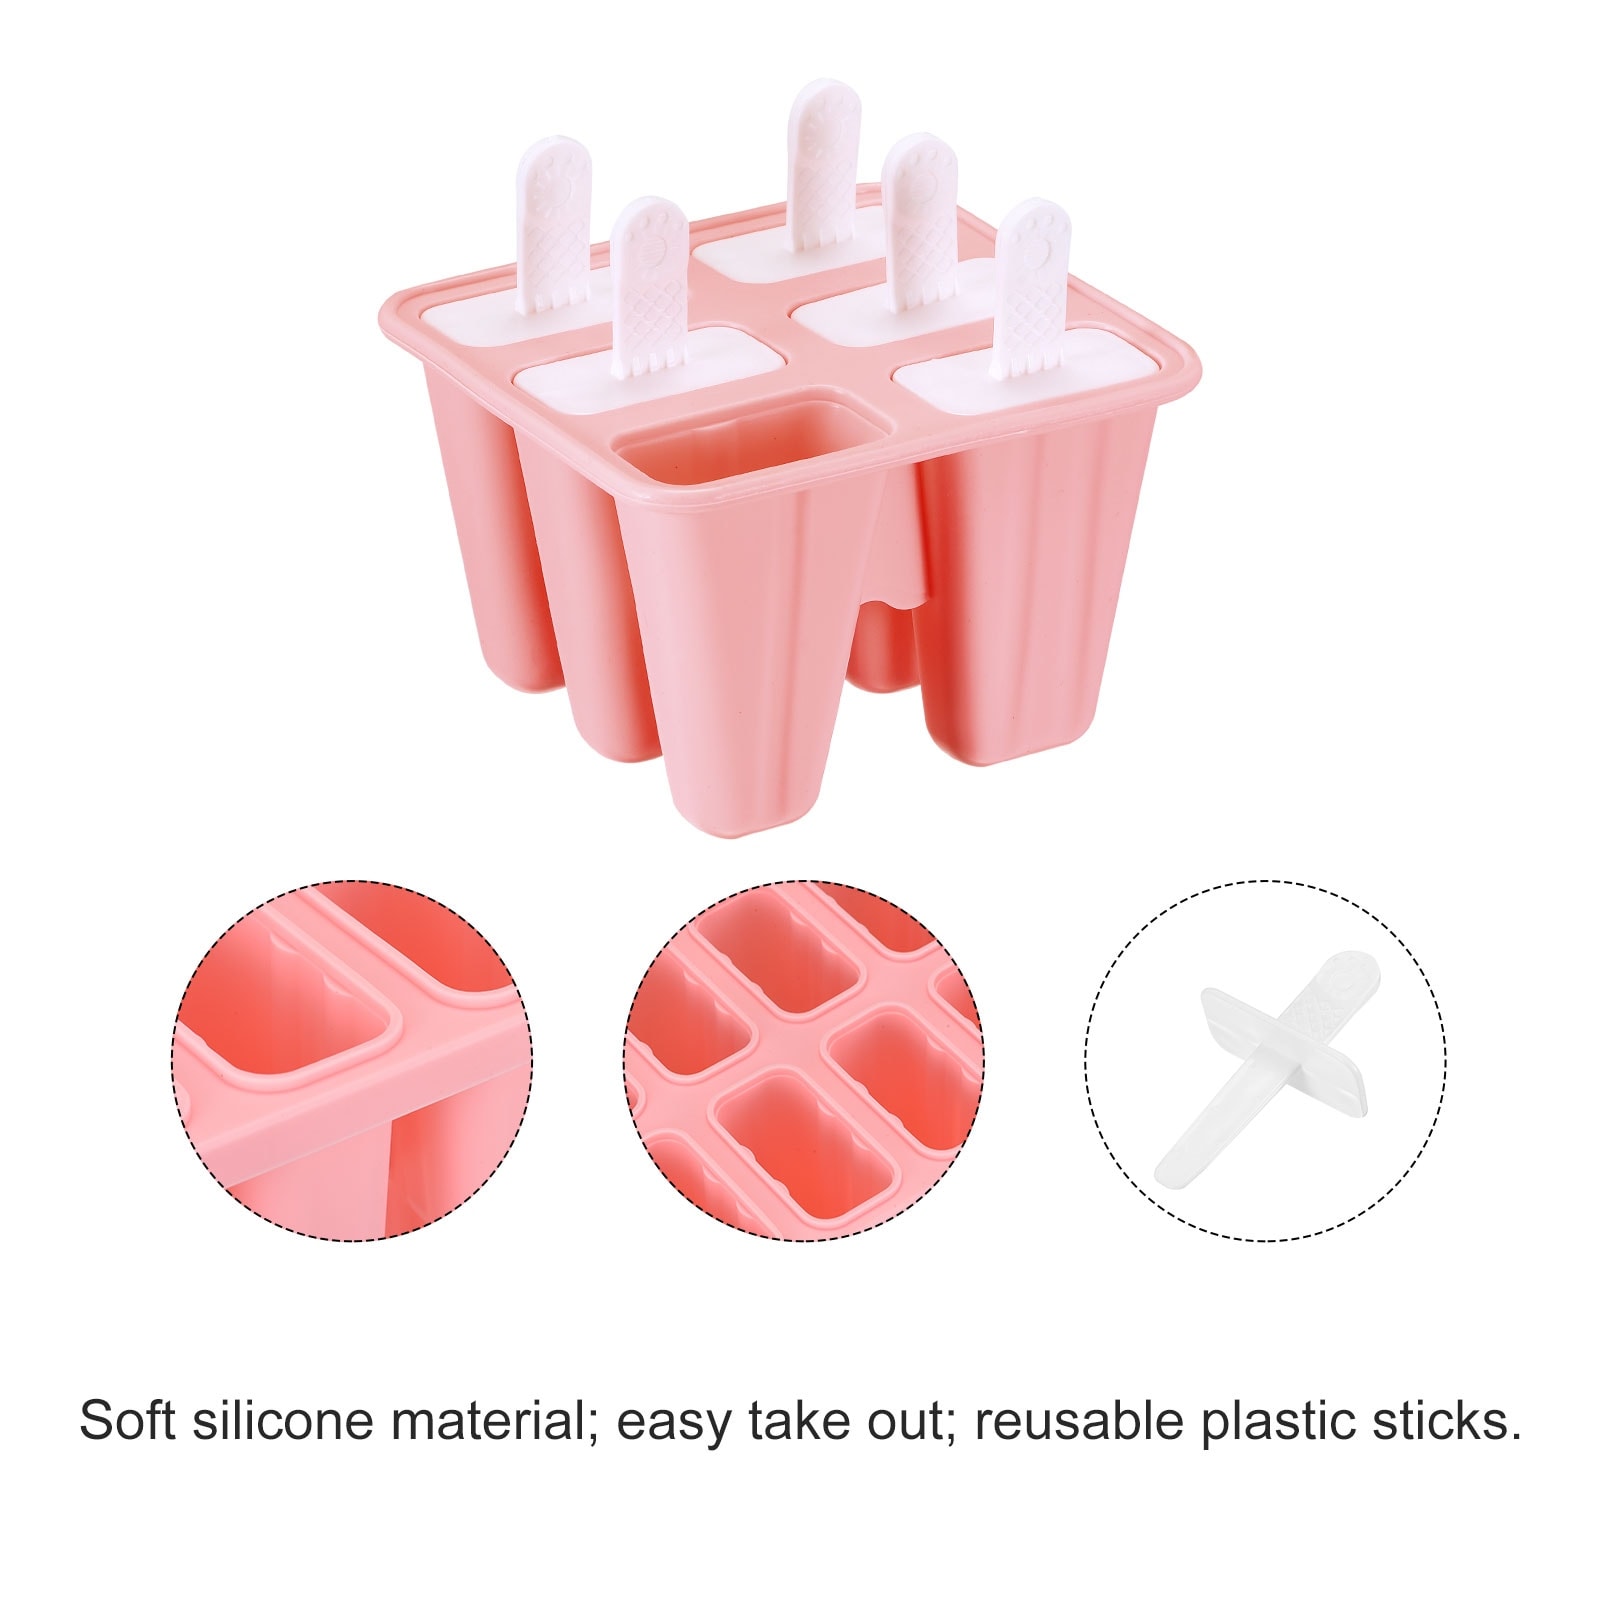 https://ak1.ostkcdn.com/images/products/is/images/direct/297db17e00e52cf0d8f9a23a209c7d2e5c6448cb/Silicone-Ice-Pops-Molds-6Pcs%2C-with-Sticks-Funnel-and-Cleaning-Brush.jpg